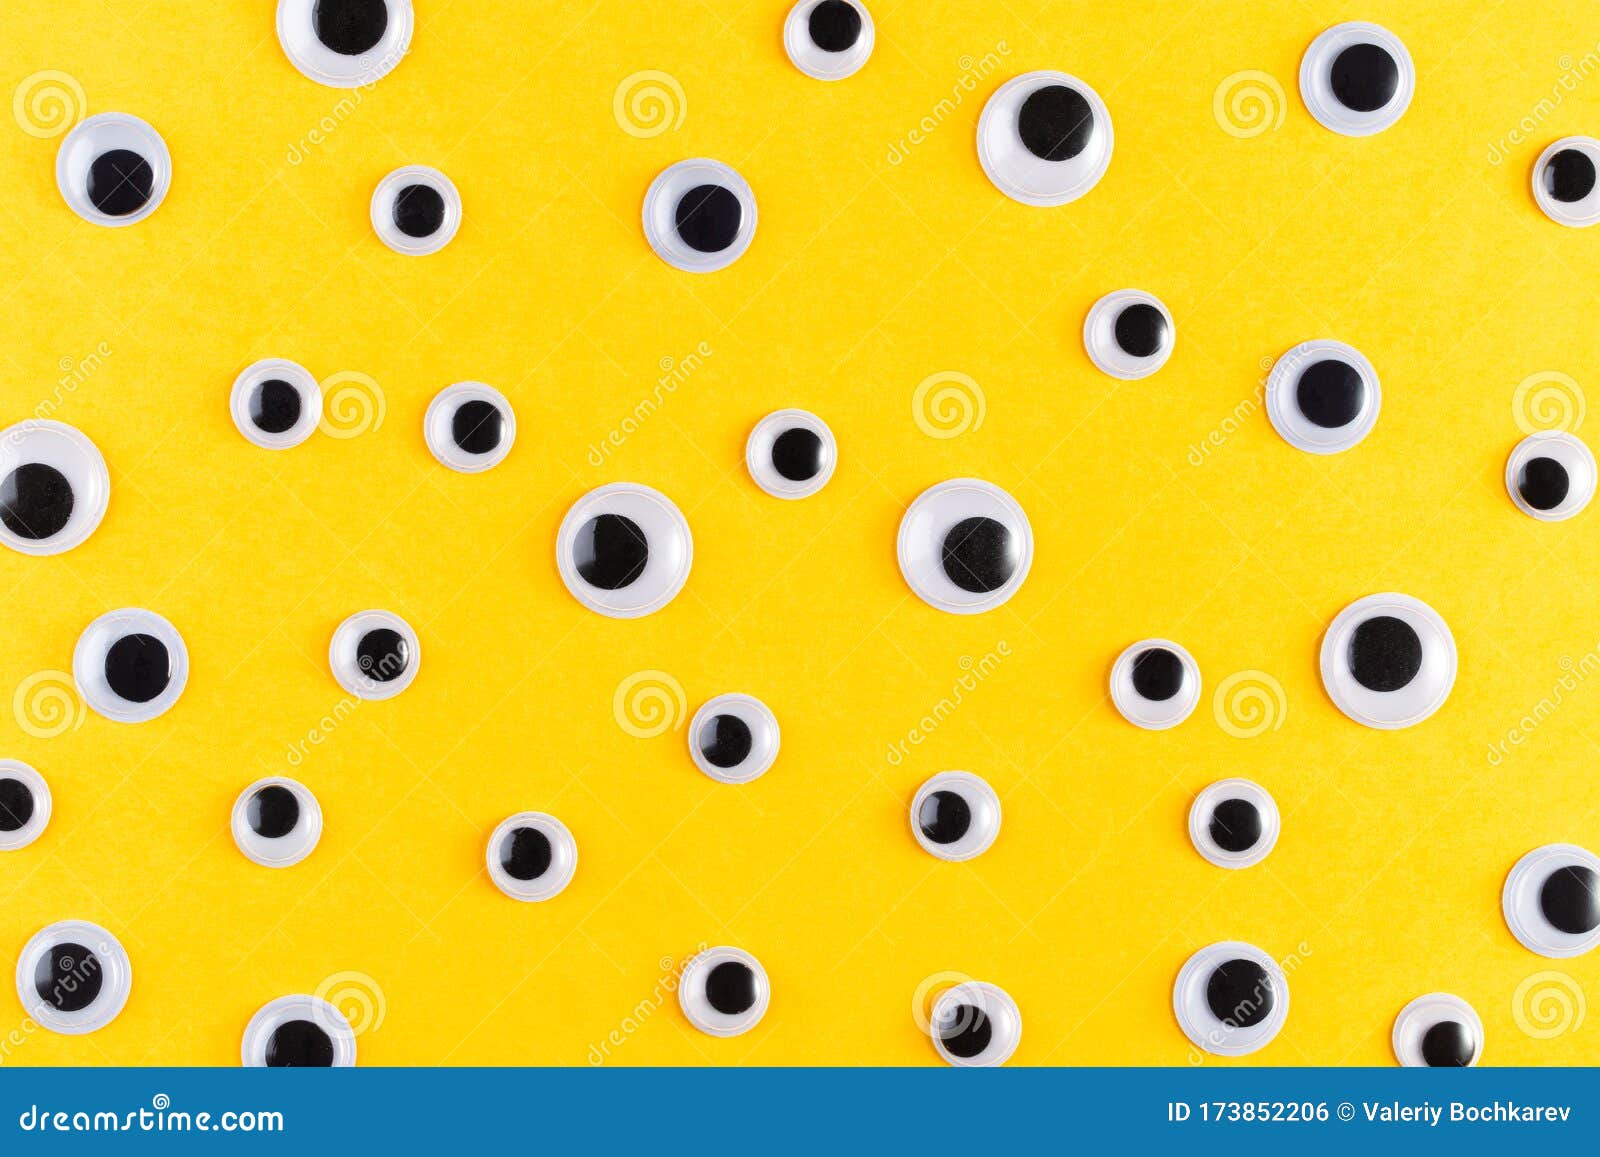 Googly eyes are small plastic craft supplies used to imitate